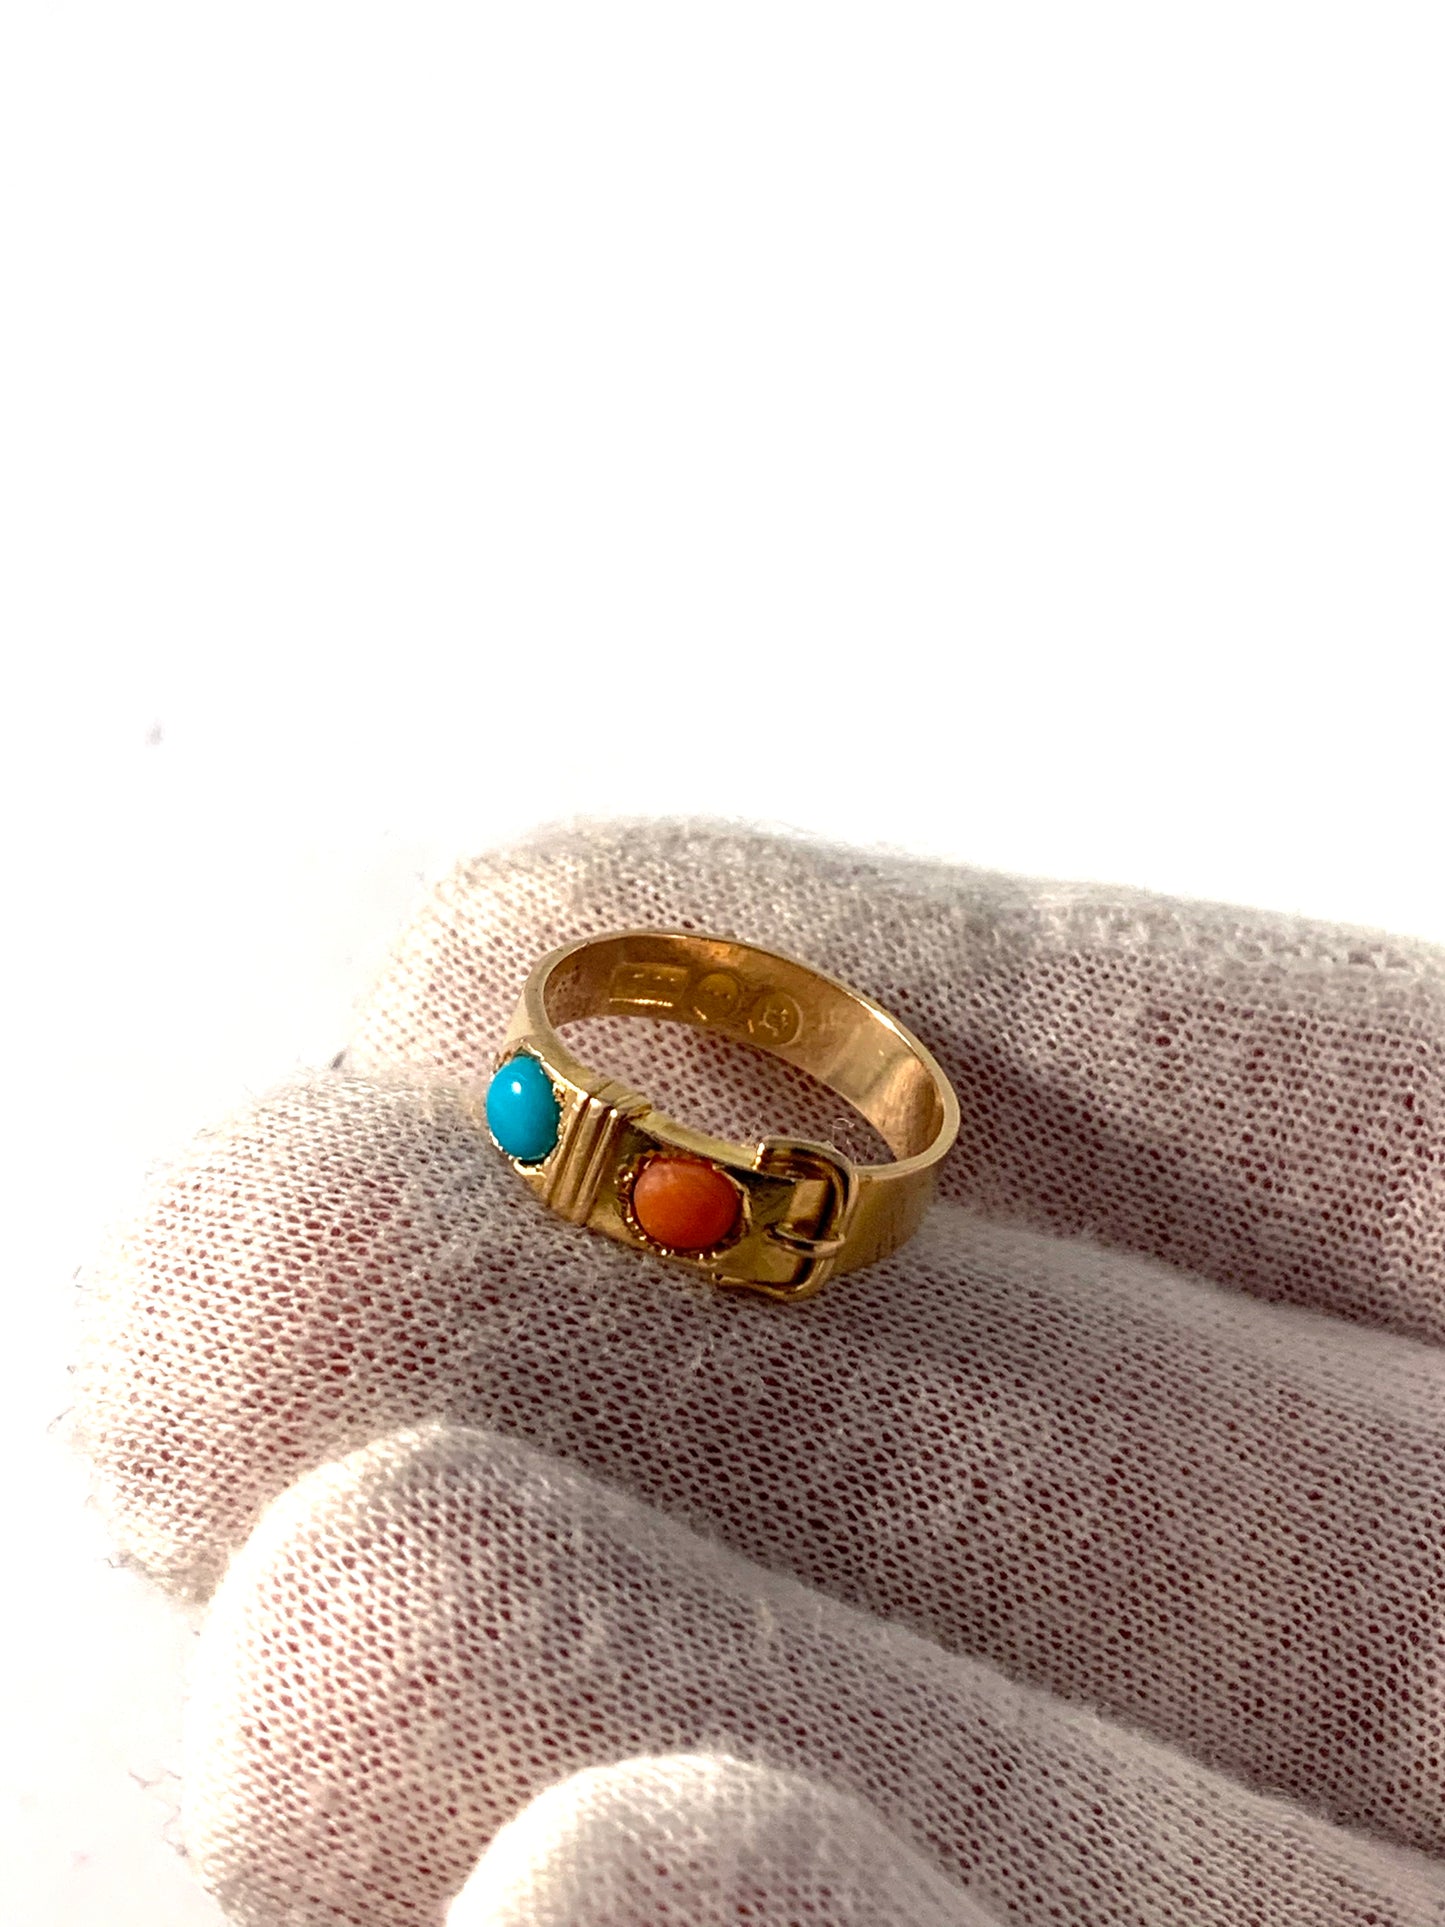 London 1861 Victorian 15k Gold Coral Turquoise Belt Buckle Ring.